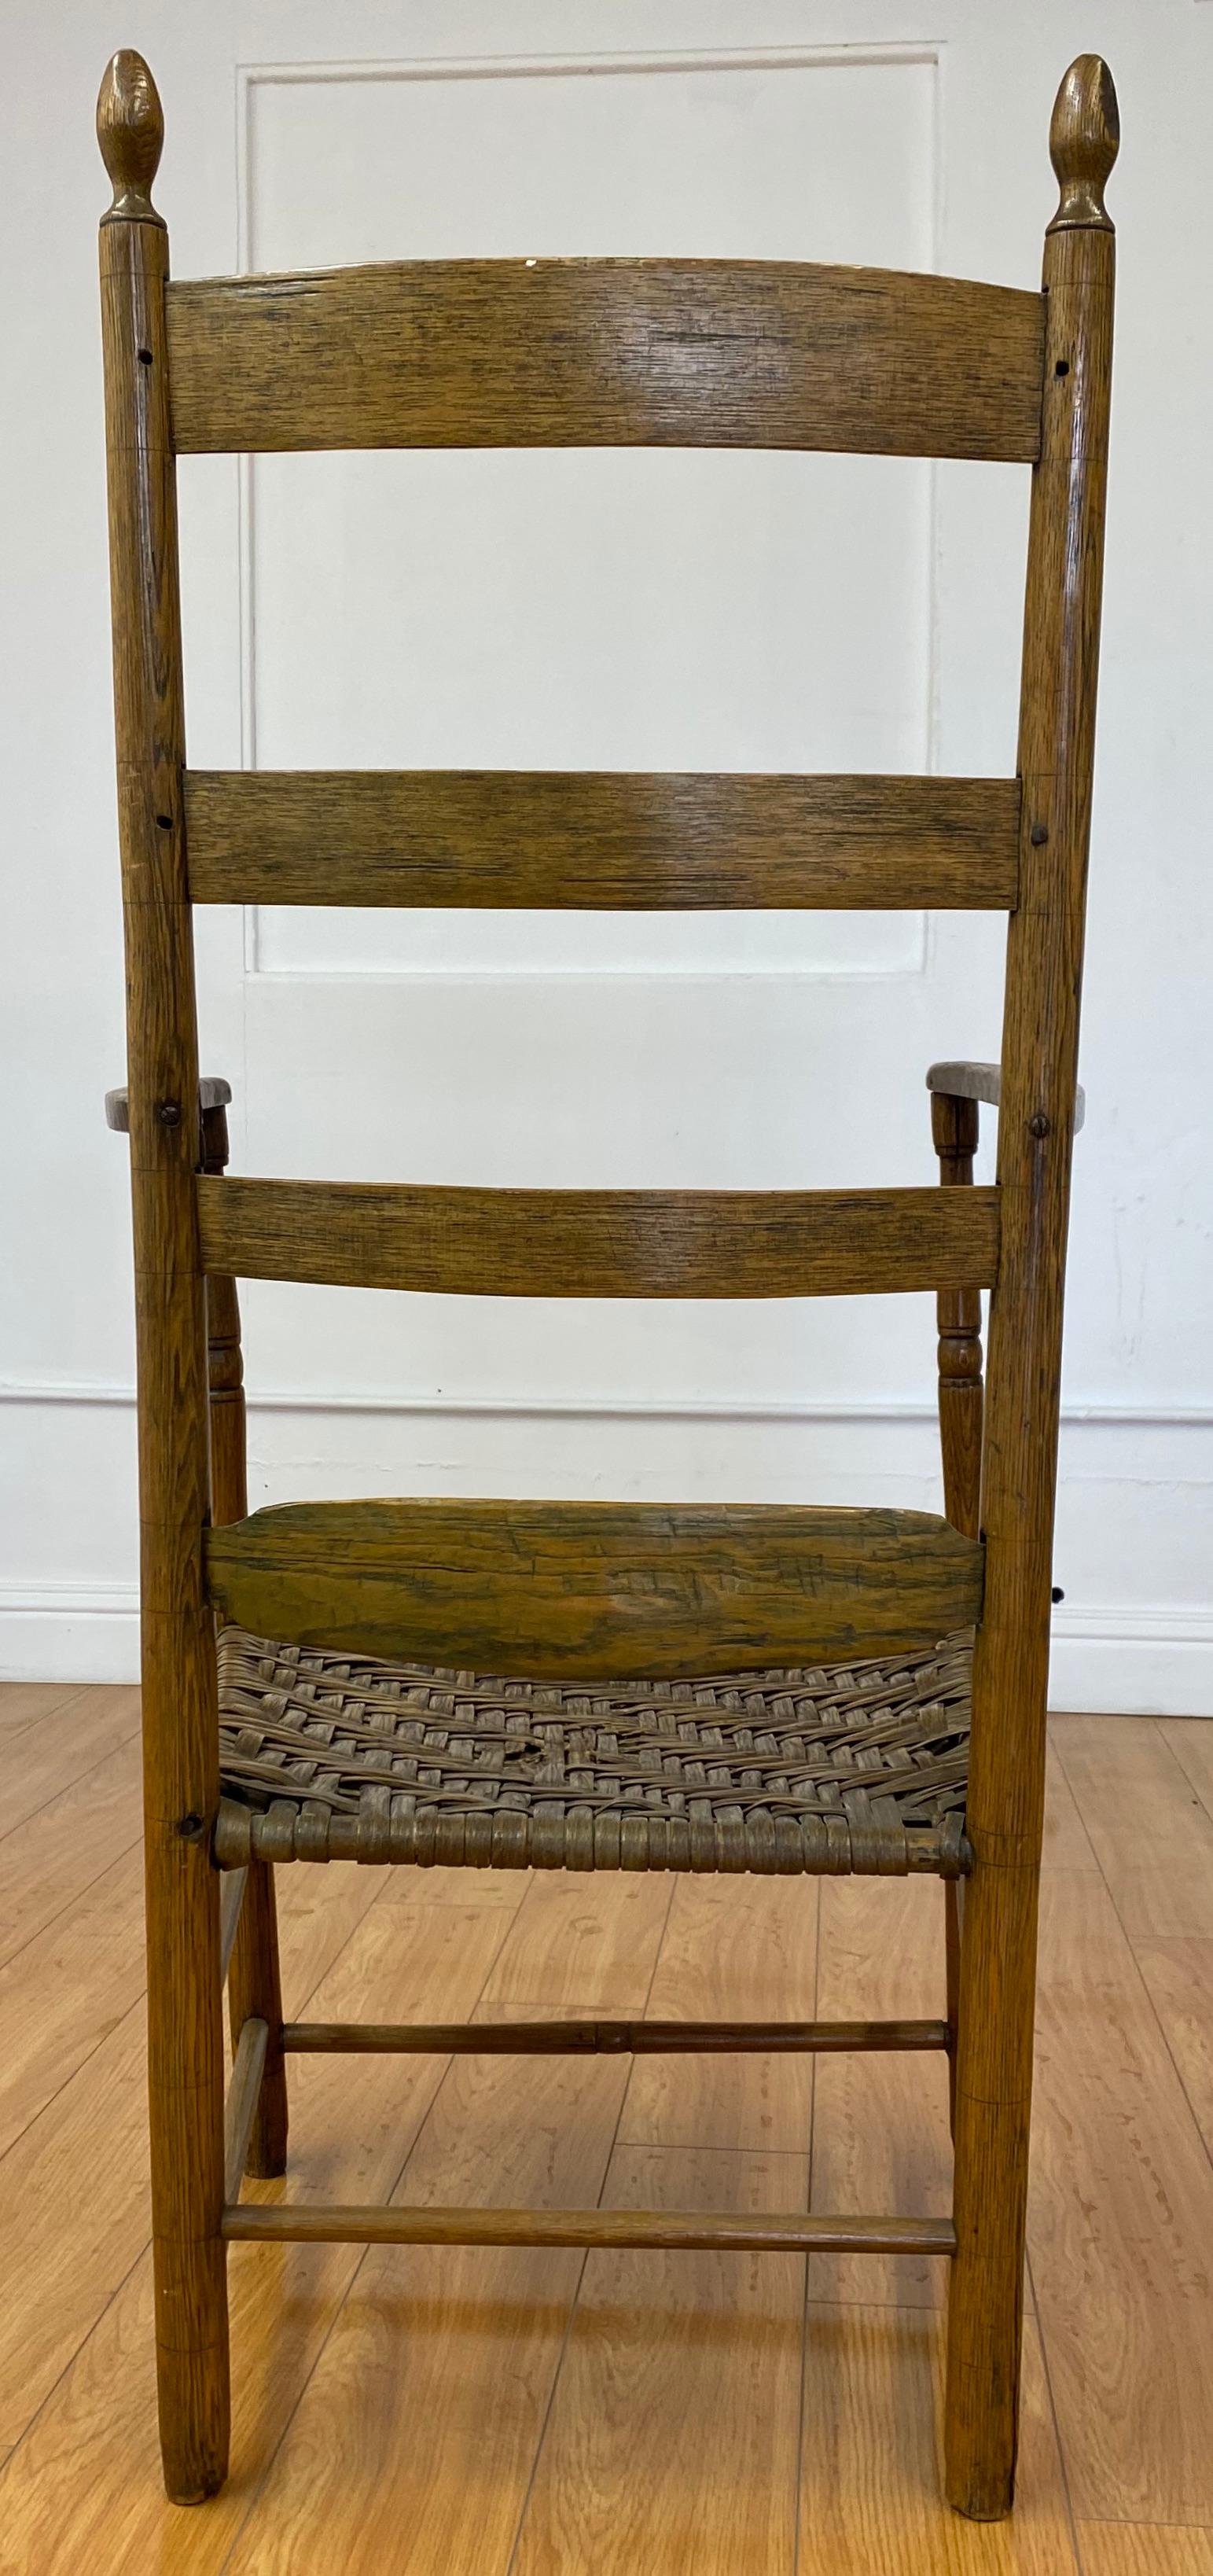 Hand-Crafted 18th to 19th Century Ladder Back Chair with Reed Seat